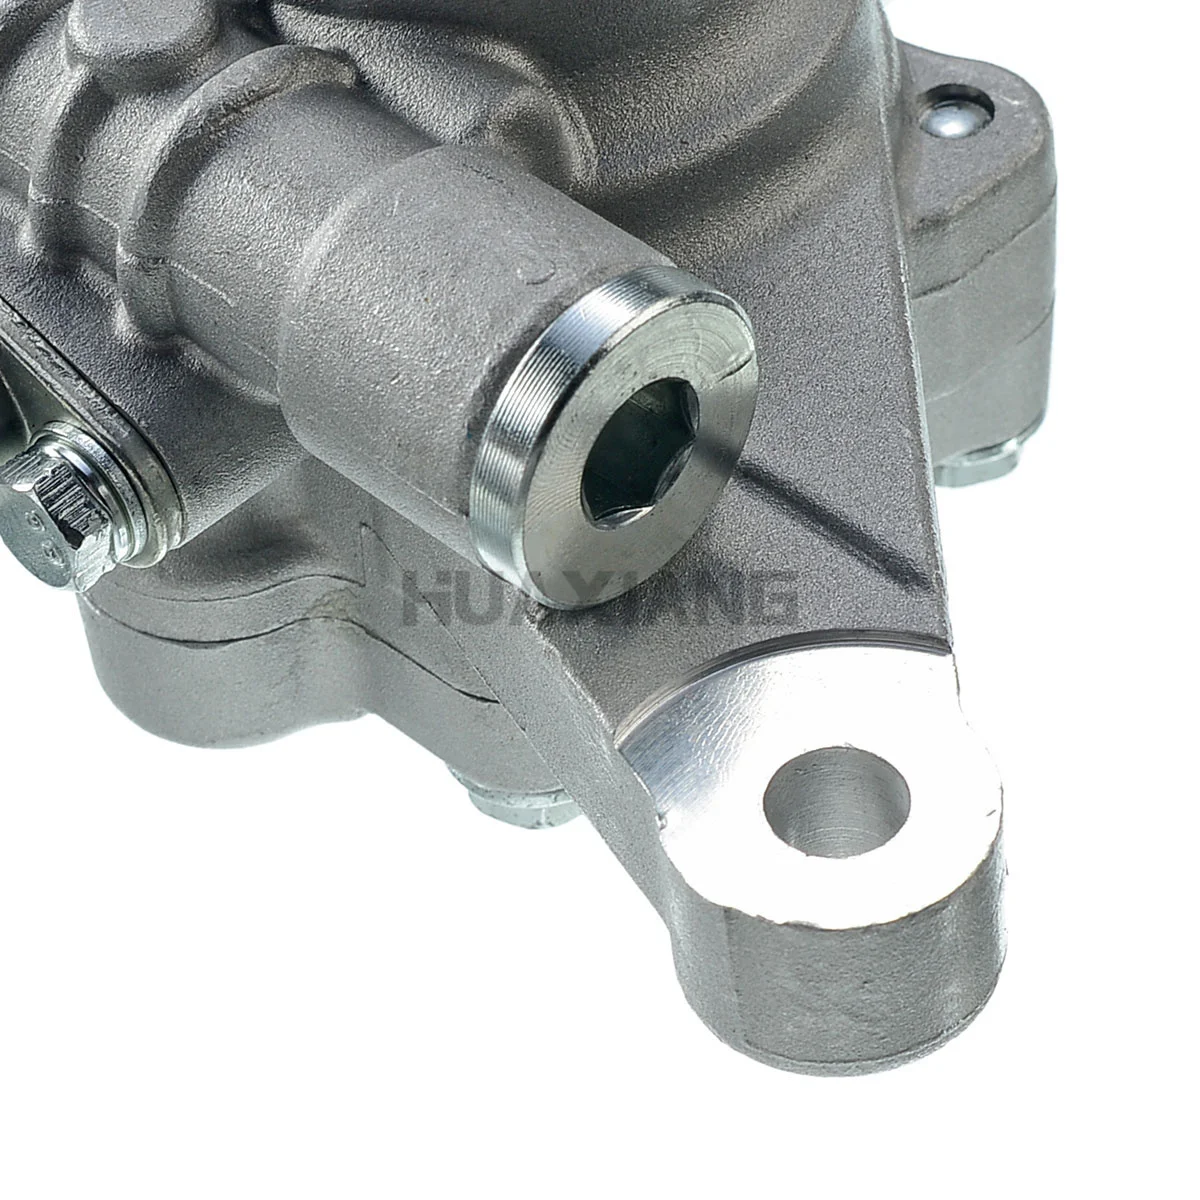 

CN US CA New Power Steering Pump without Reservoir for Acura RL 96-04 TL 97-98 6Cyl 3.2L 3.5L 56110 P5A 013